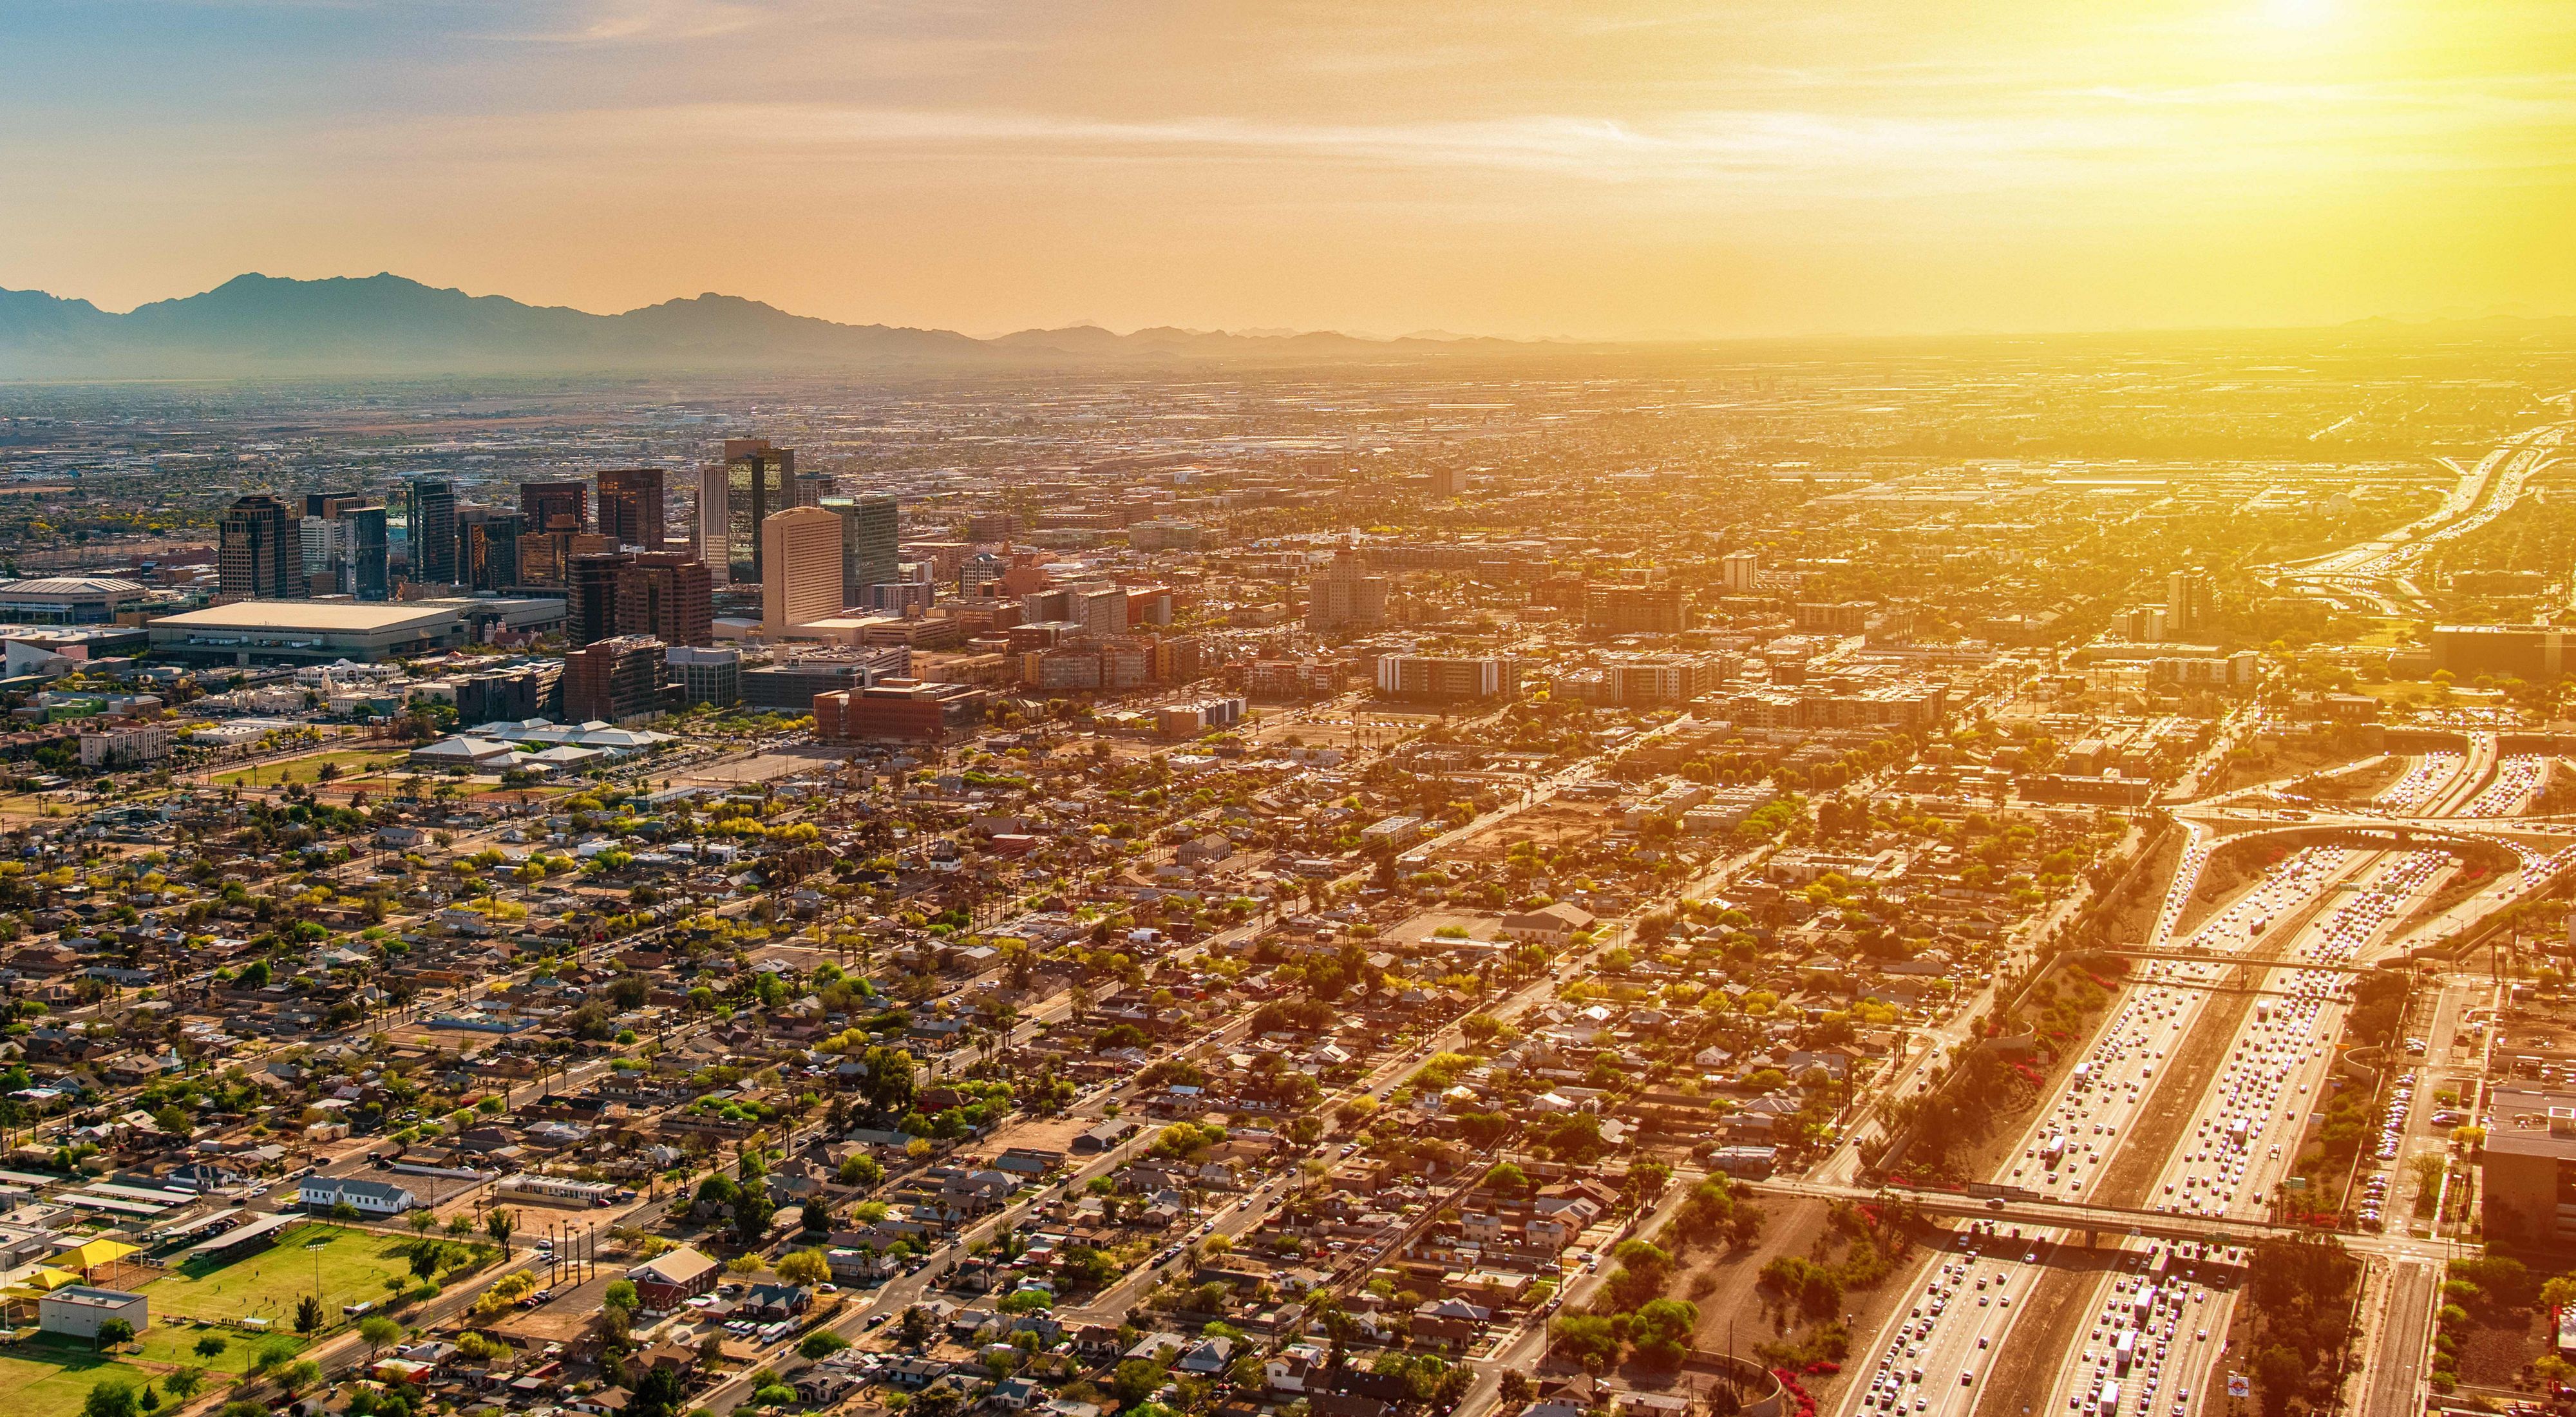 An aerial view of downtown Phoenix, Arizona and the surrounding urban area from an altitude of about 2,000 feet over the desert floor during dusk.